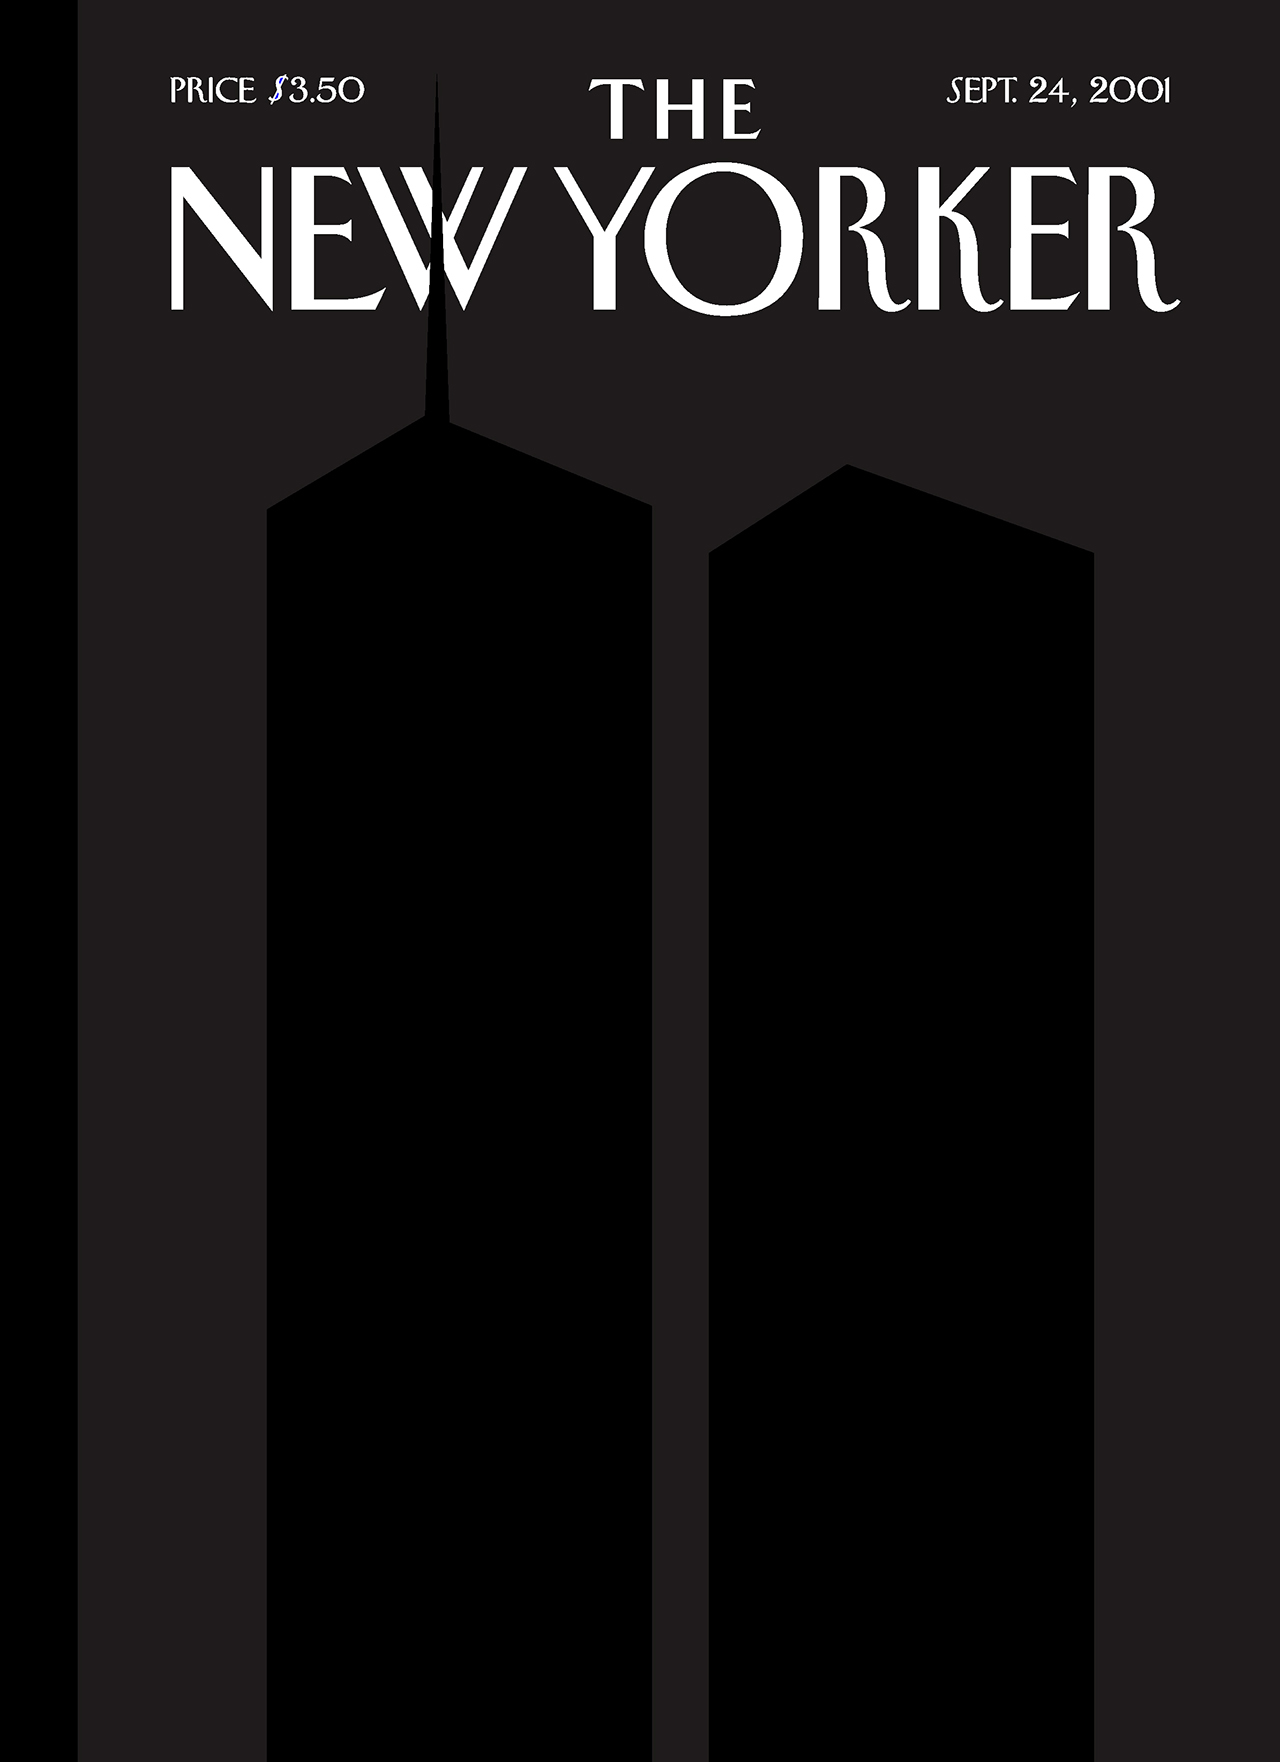 An illustrated cover of the New Yorker magazine released shortly after 9/11 depicts a silhouetted Twin Towers on a dark gray background.